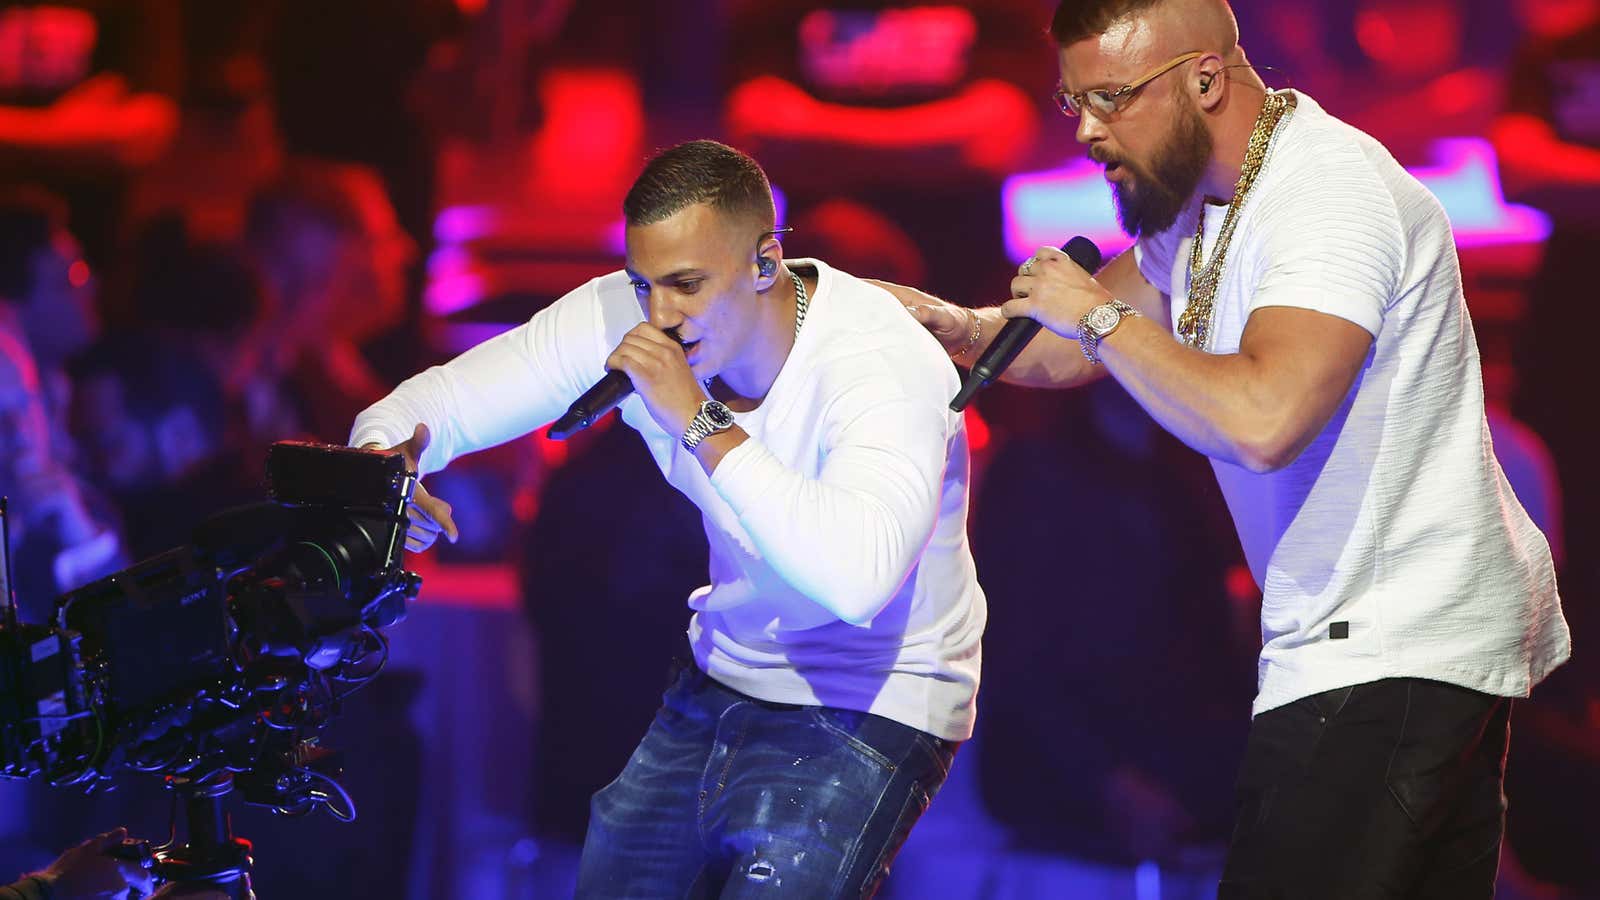 German rappers Kollegah and Farid Bang on stage.